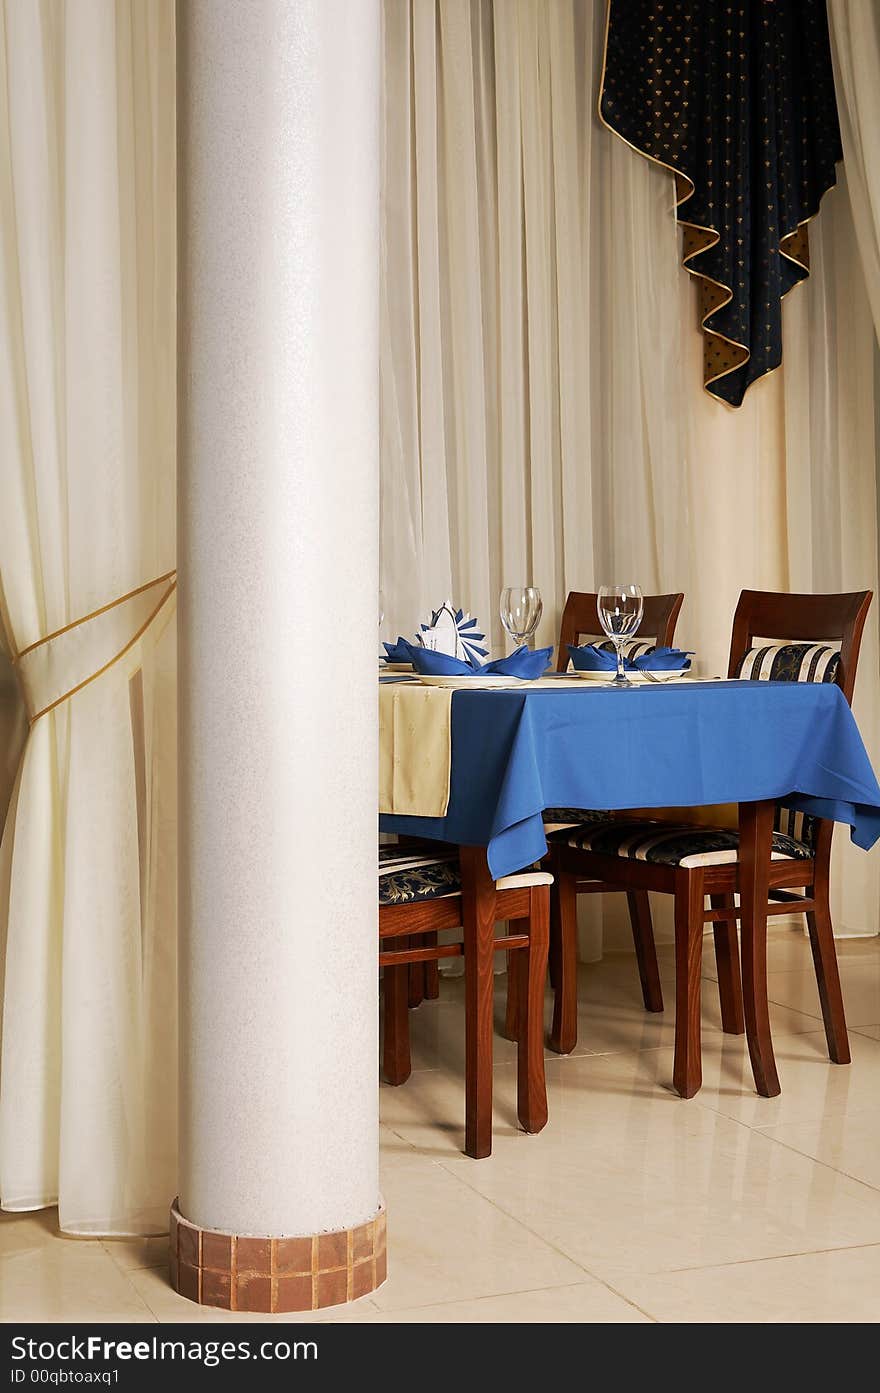 Table with a blue tablecloth at fashionable and modern restaurant